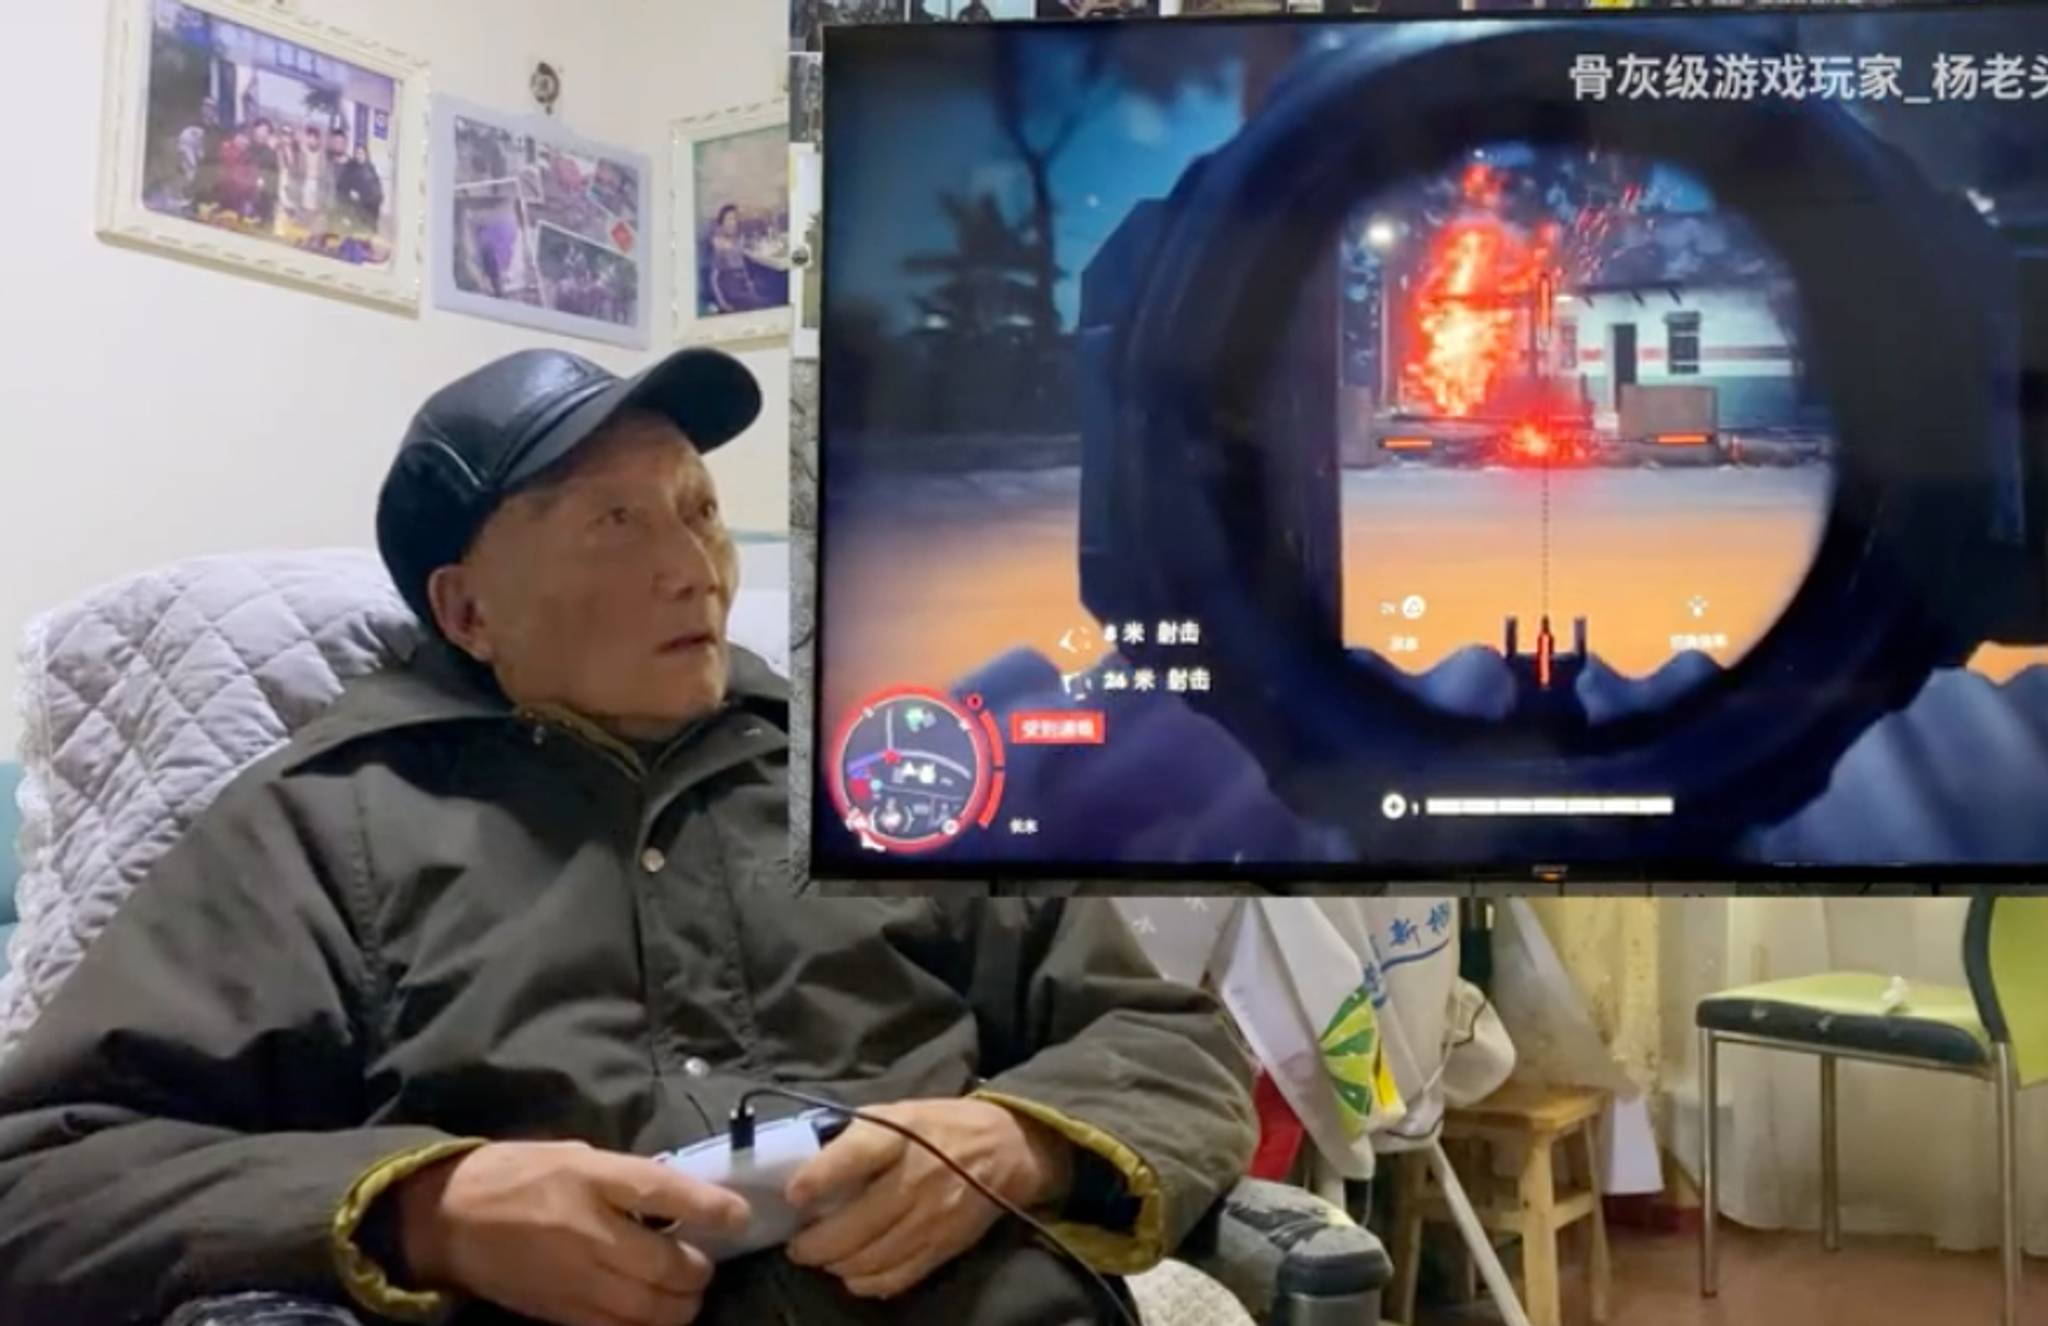 Older Adults in China are gaming for intimacy